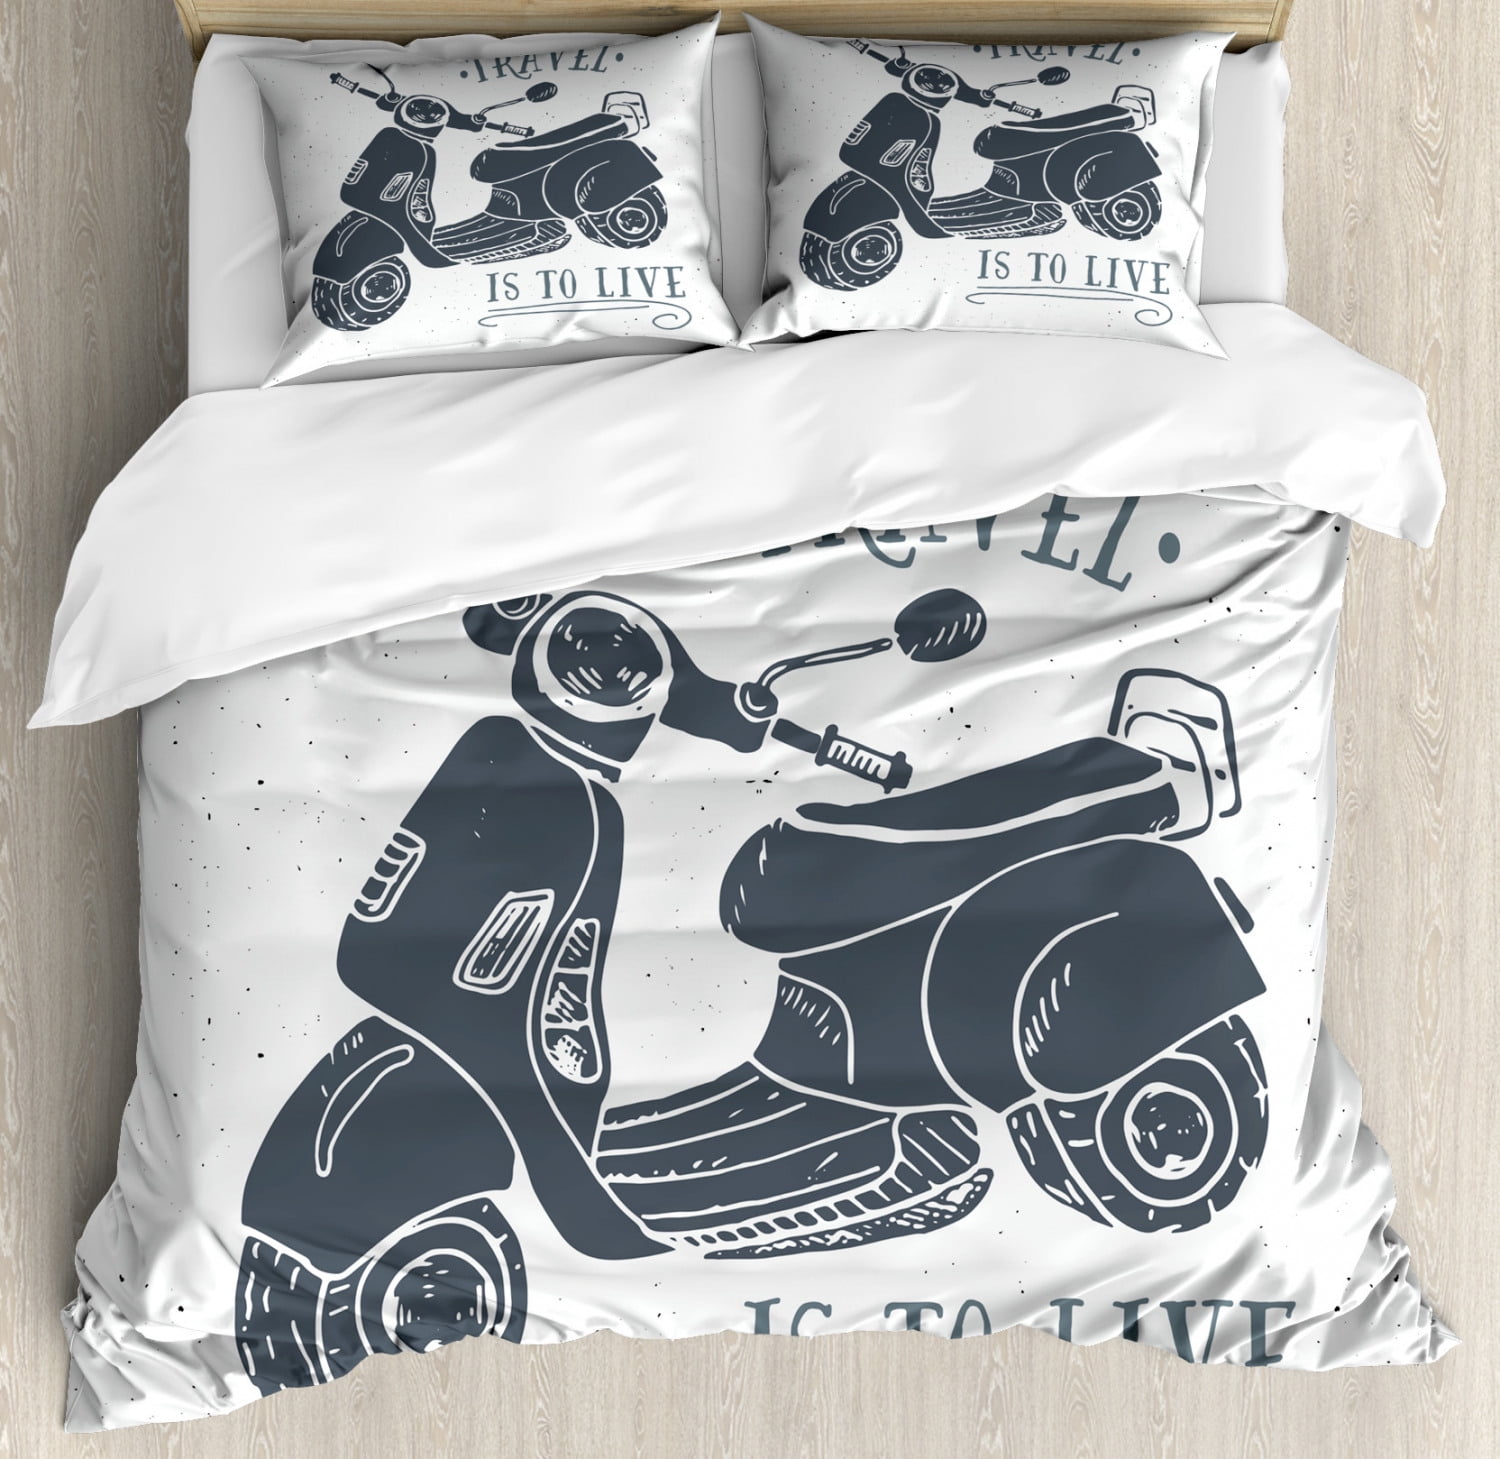 Motorcycle Duvet Cover Set King Size Sketch Scooter With To